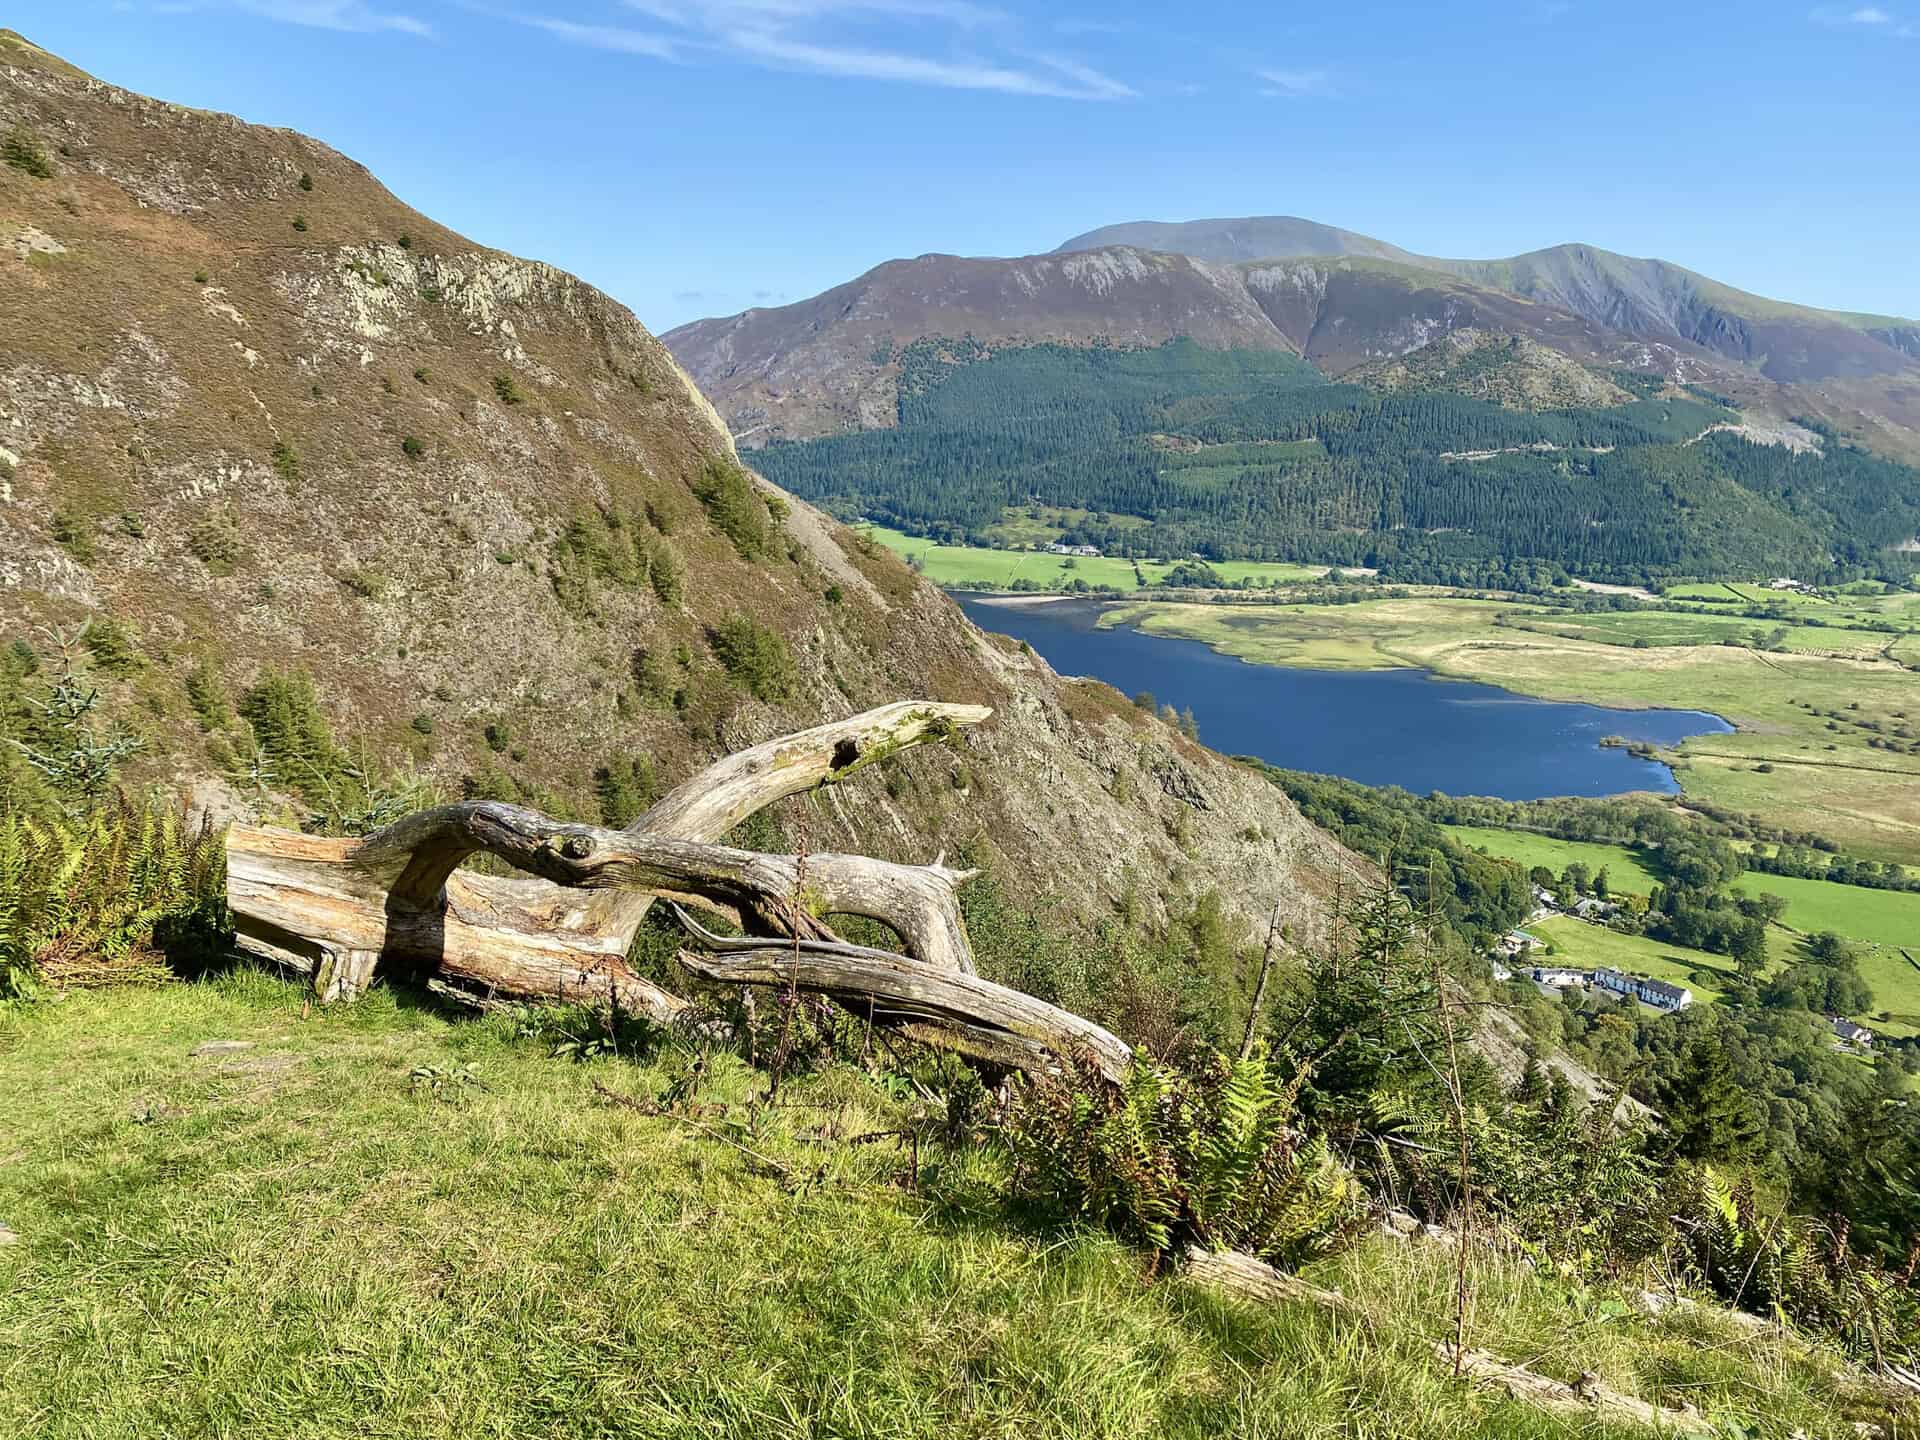 The southern tip of Bassenthwaite Lake viewed from Birch Crag, just south of Barf.